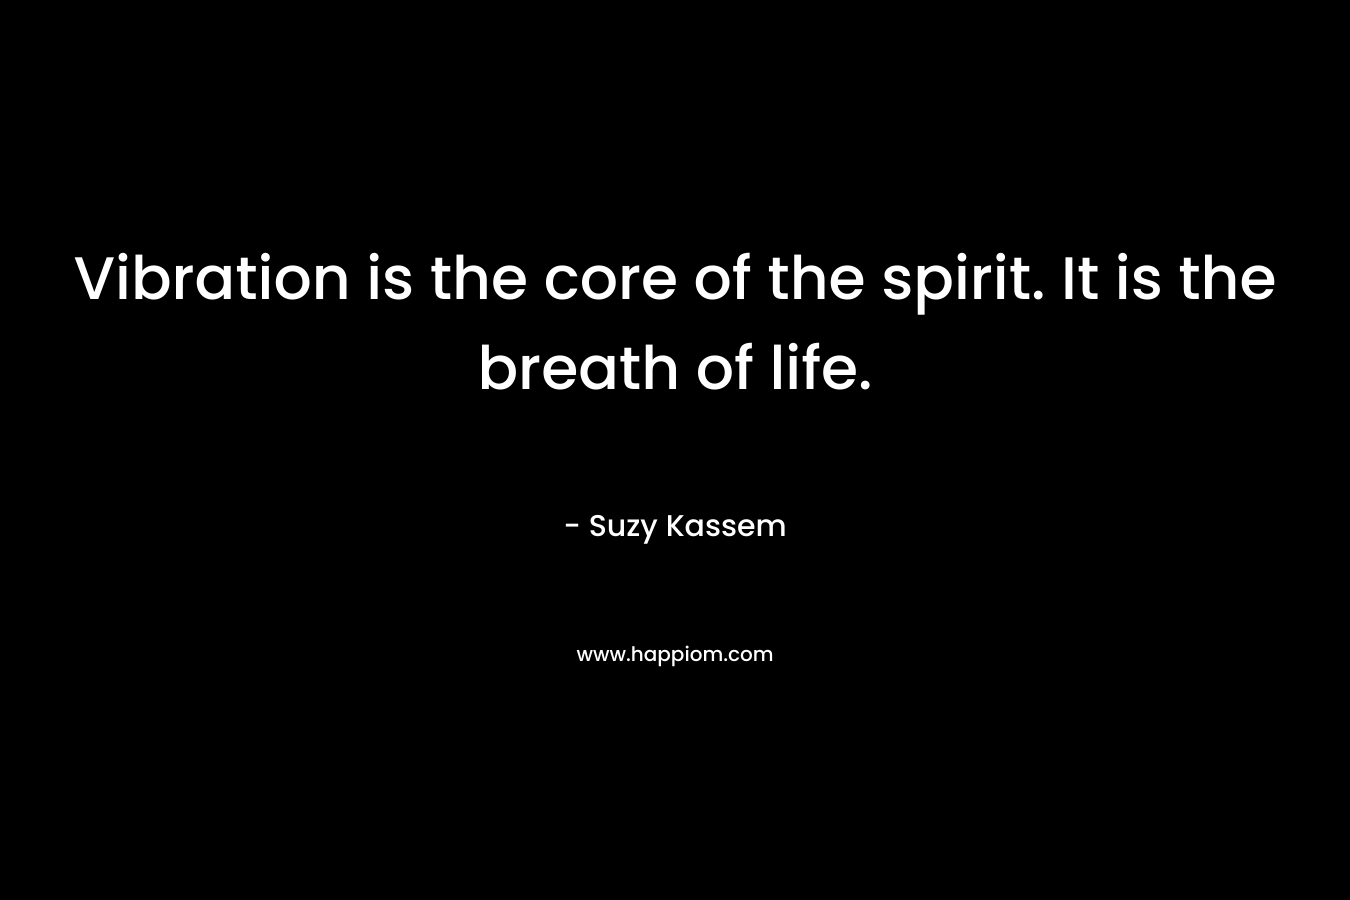 Vibration is the core of the spirit. It is the breath of life.